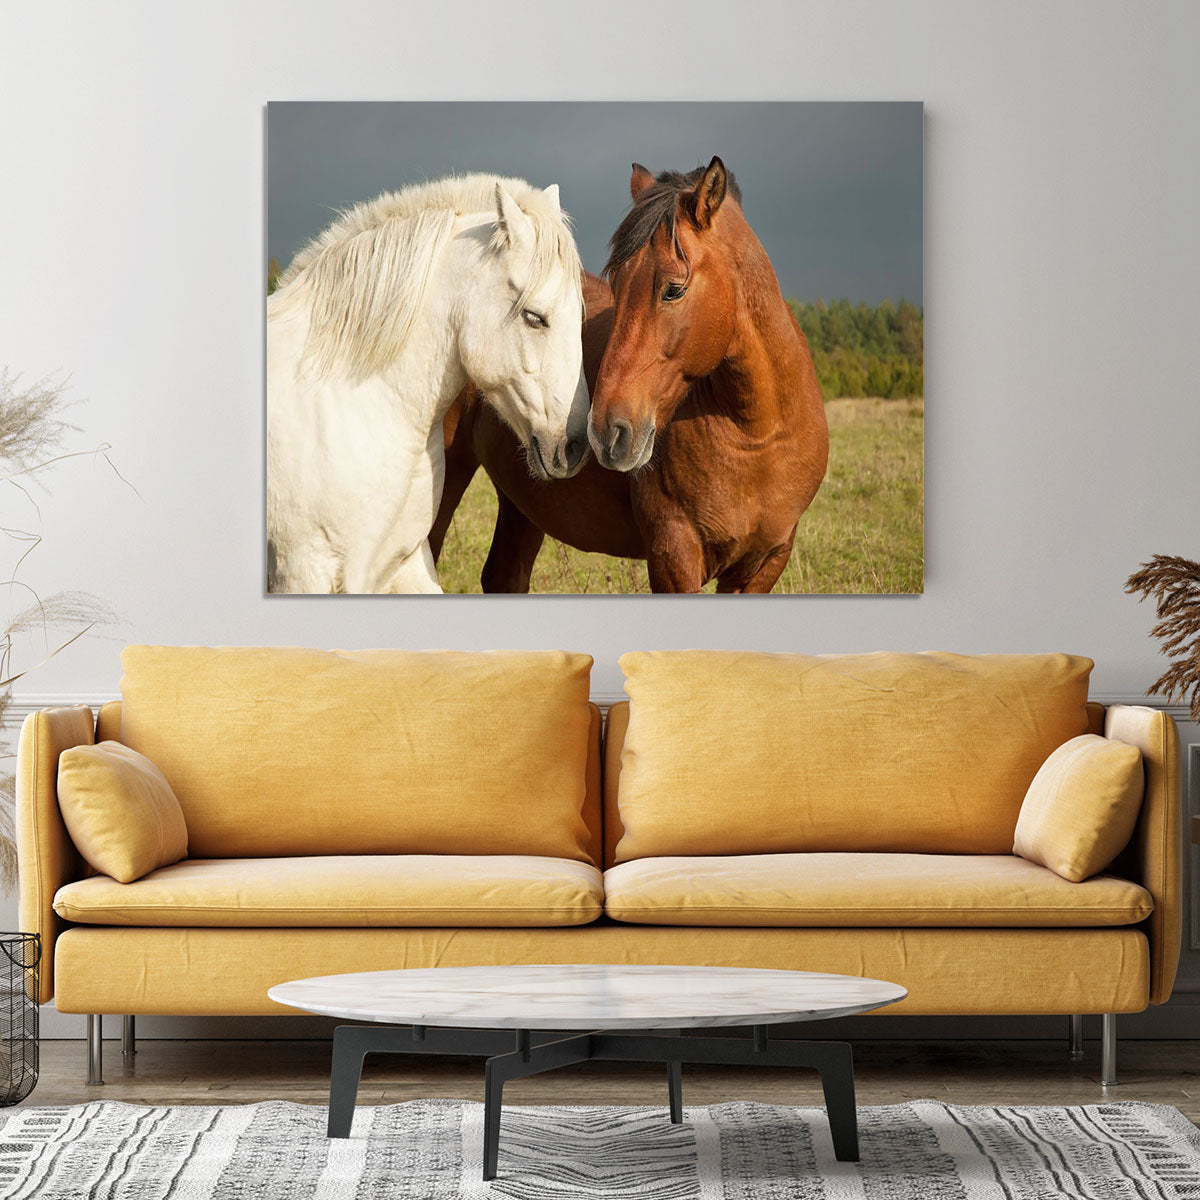 A pair of horses showing affection Canvas Print or Poster - Canvas Art Rocks - 4